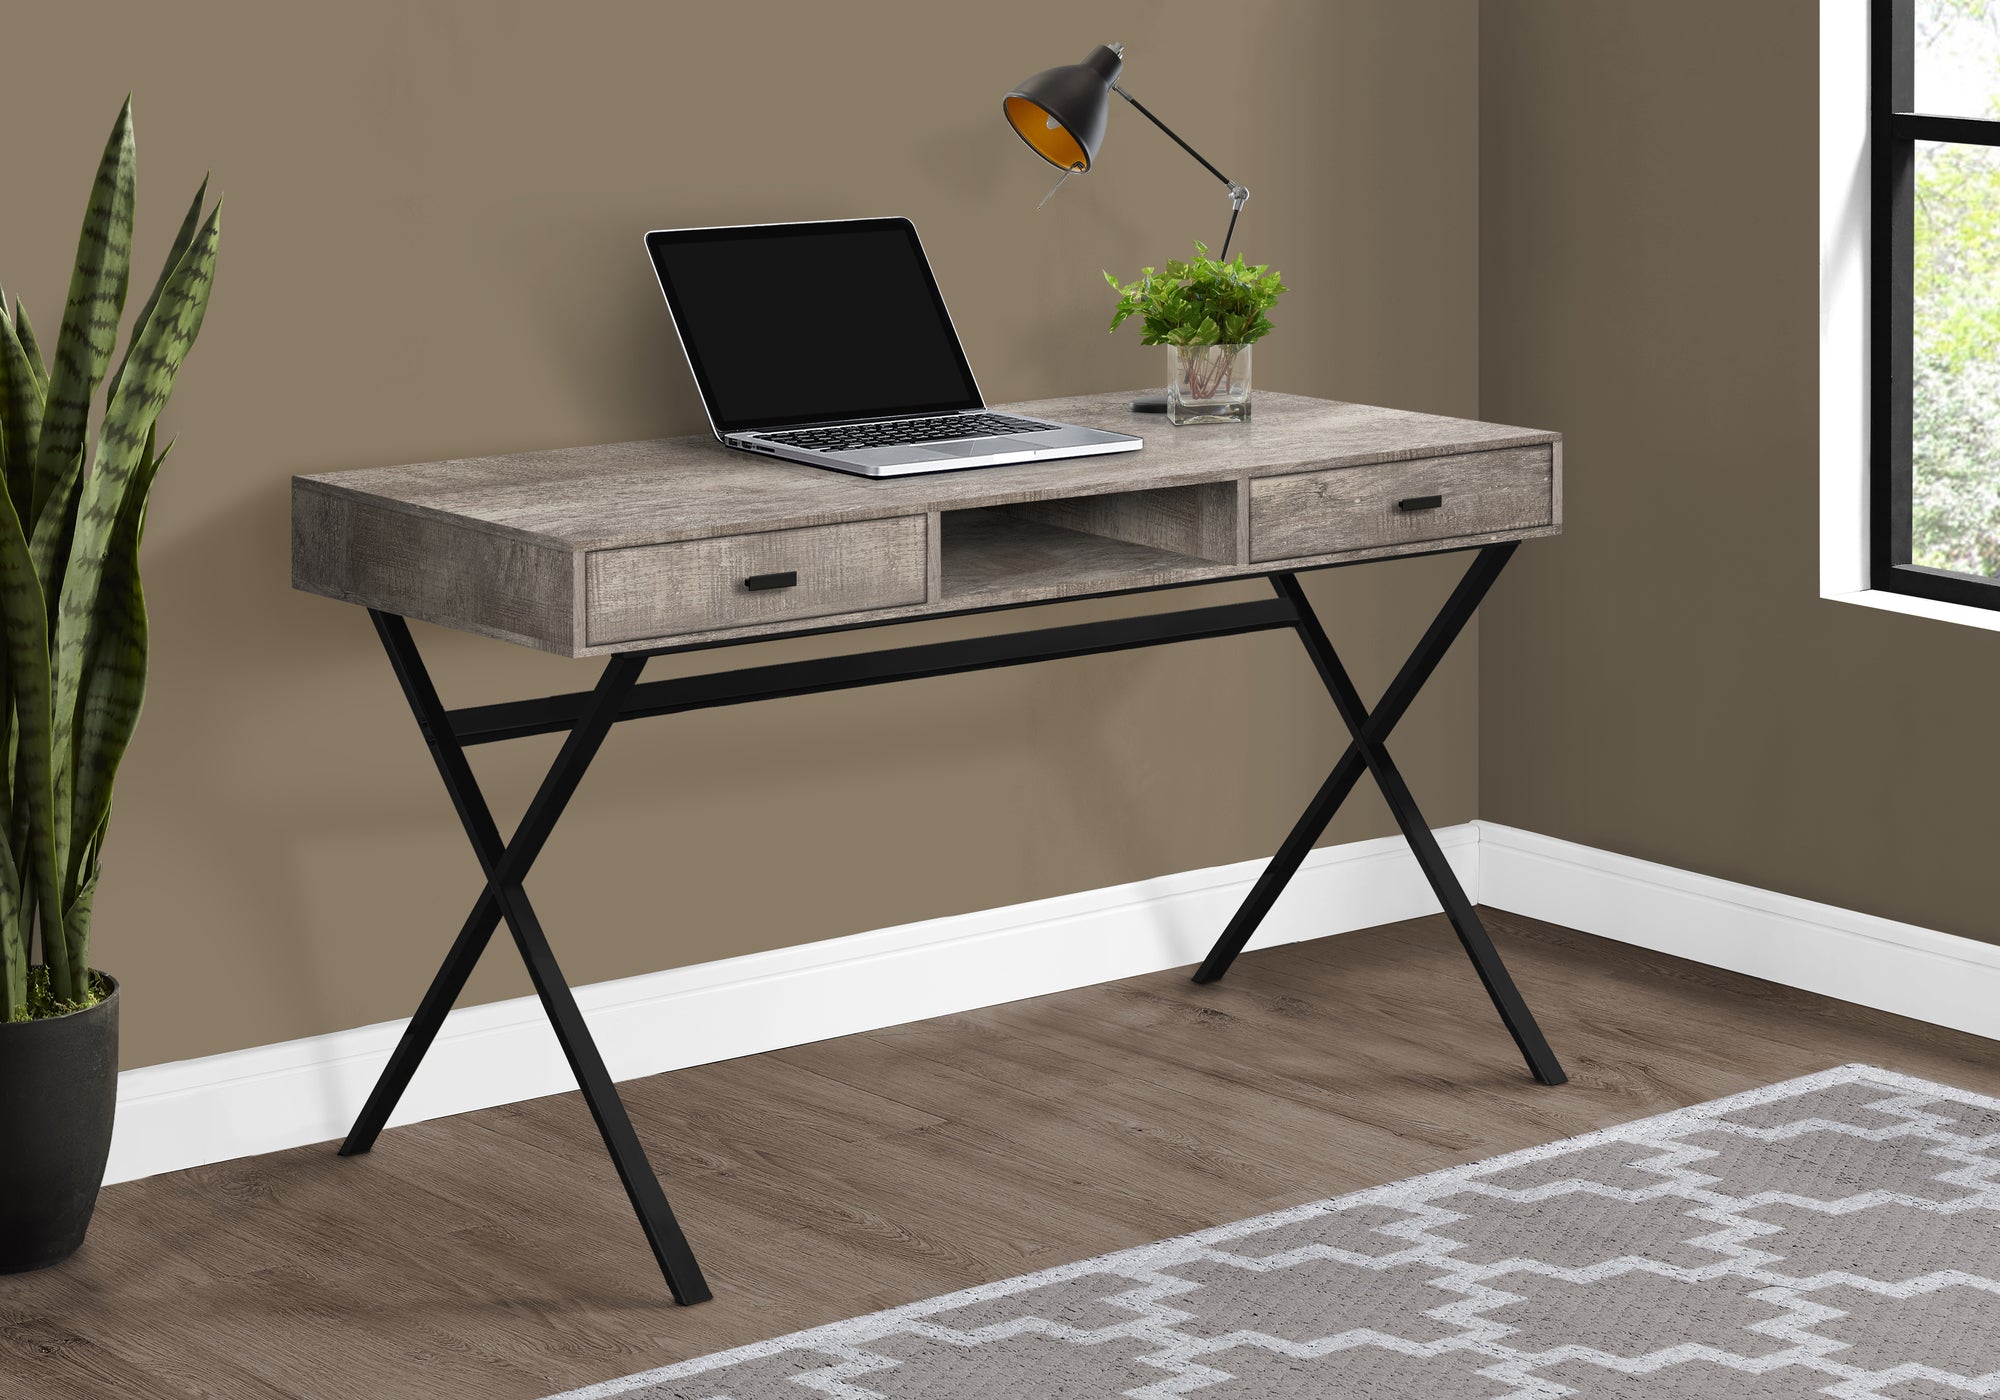 MN-177449    Computer Desk, Home Office, Laptop, Storage Drawers, 48"L, Metal, Laminate, Taupe Reclaimed Wood Look, Black, Contemporary, Modern